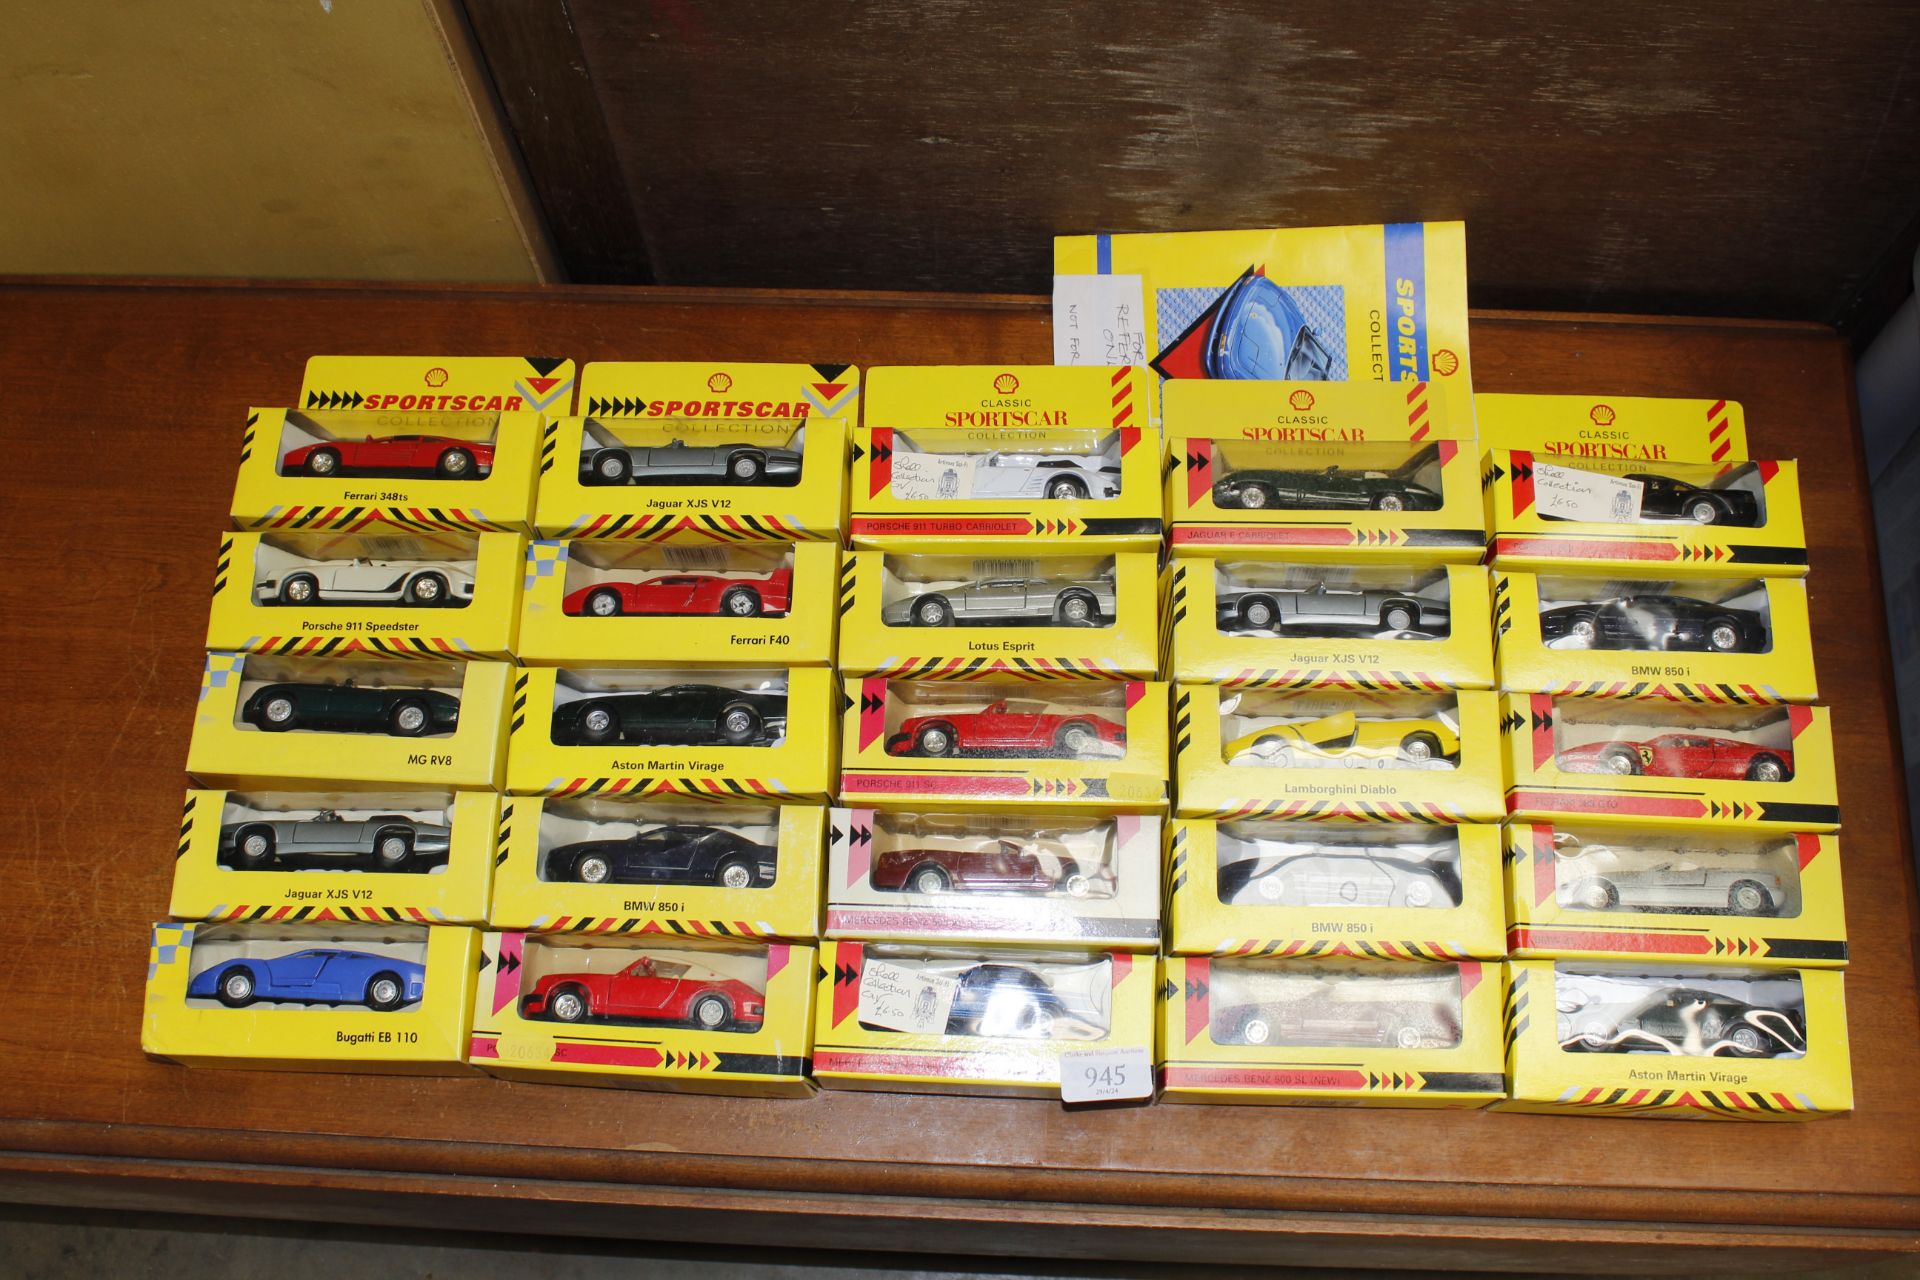 A collection of sports car die-cast vehicles